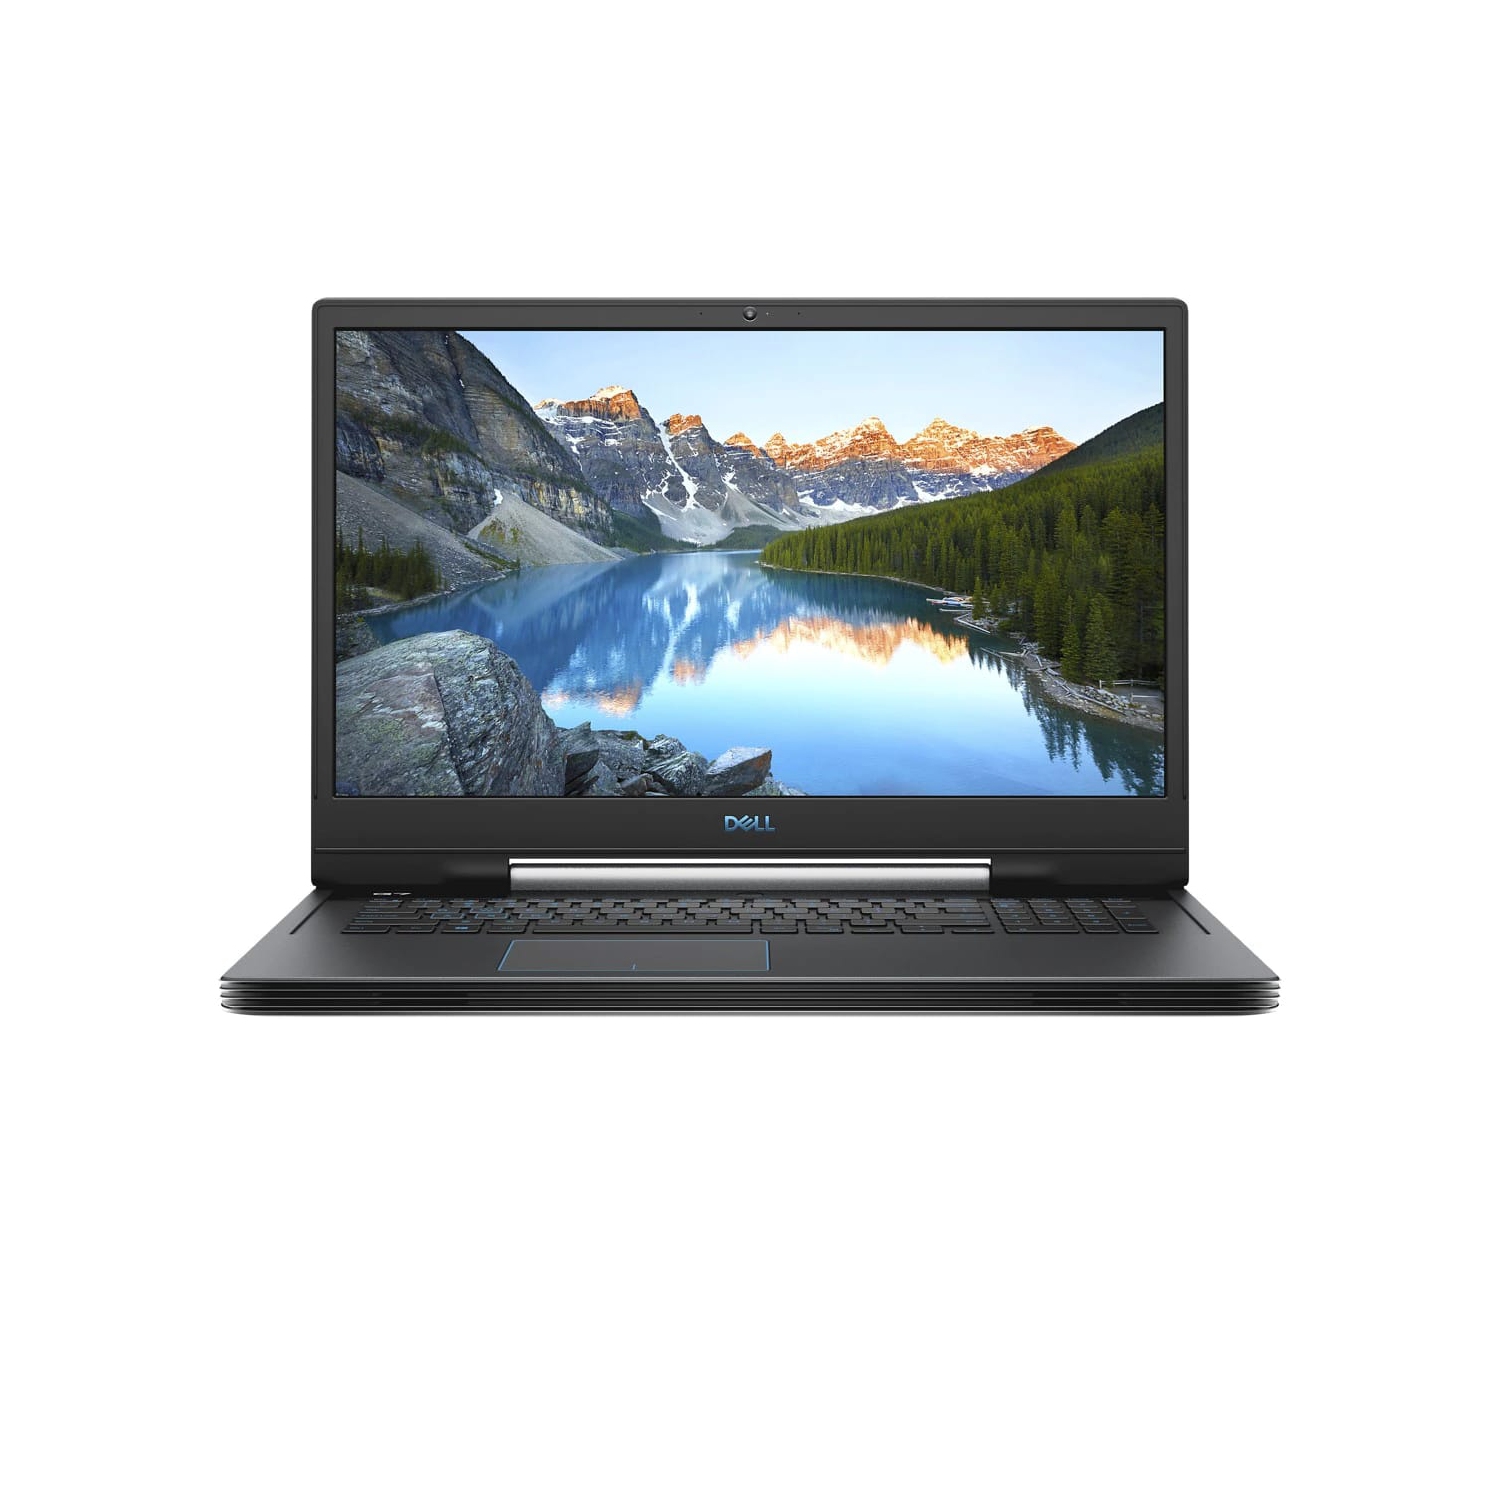 Refurbished (Excellent) – Dell G7 7790 Gaming Laptop (2019) | 17.3" FHD | Core i7 - 512GB SSD - 16GB RAM | 6 Cores @ 4.5 GHz